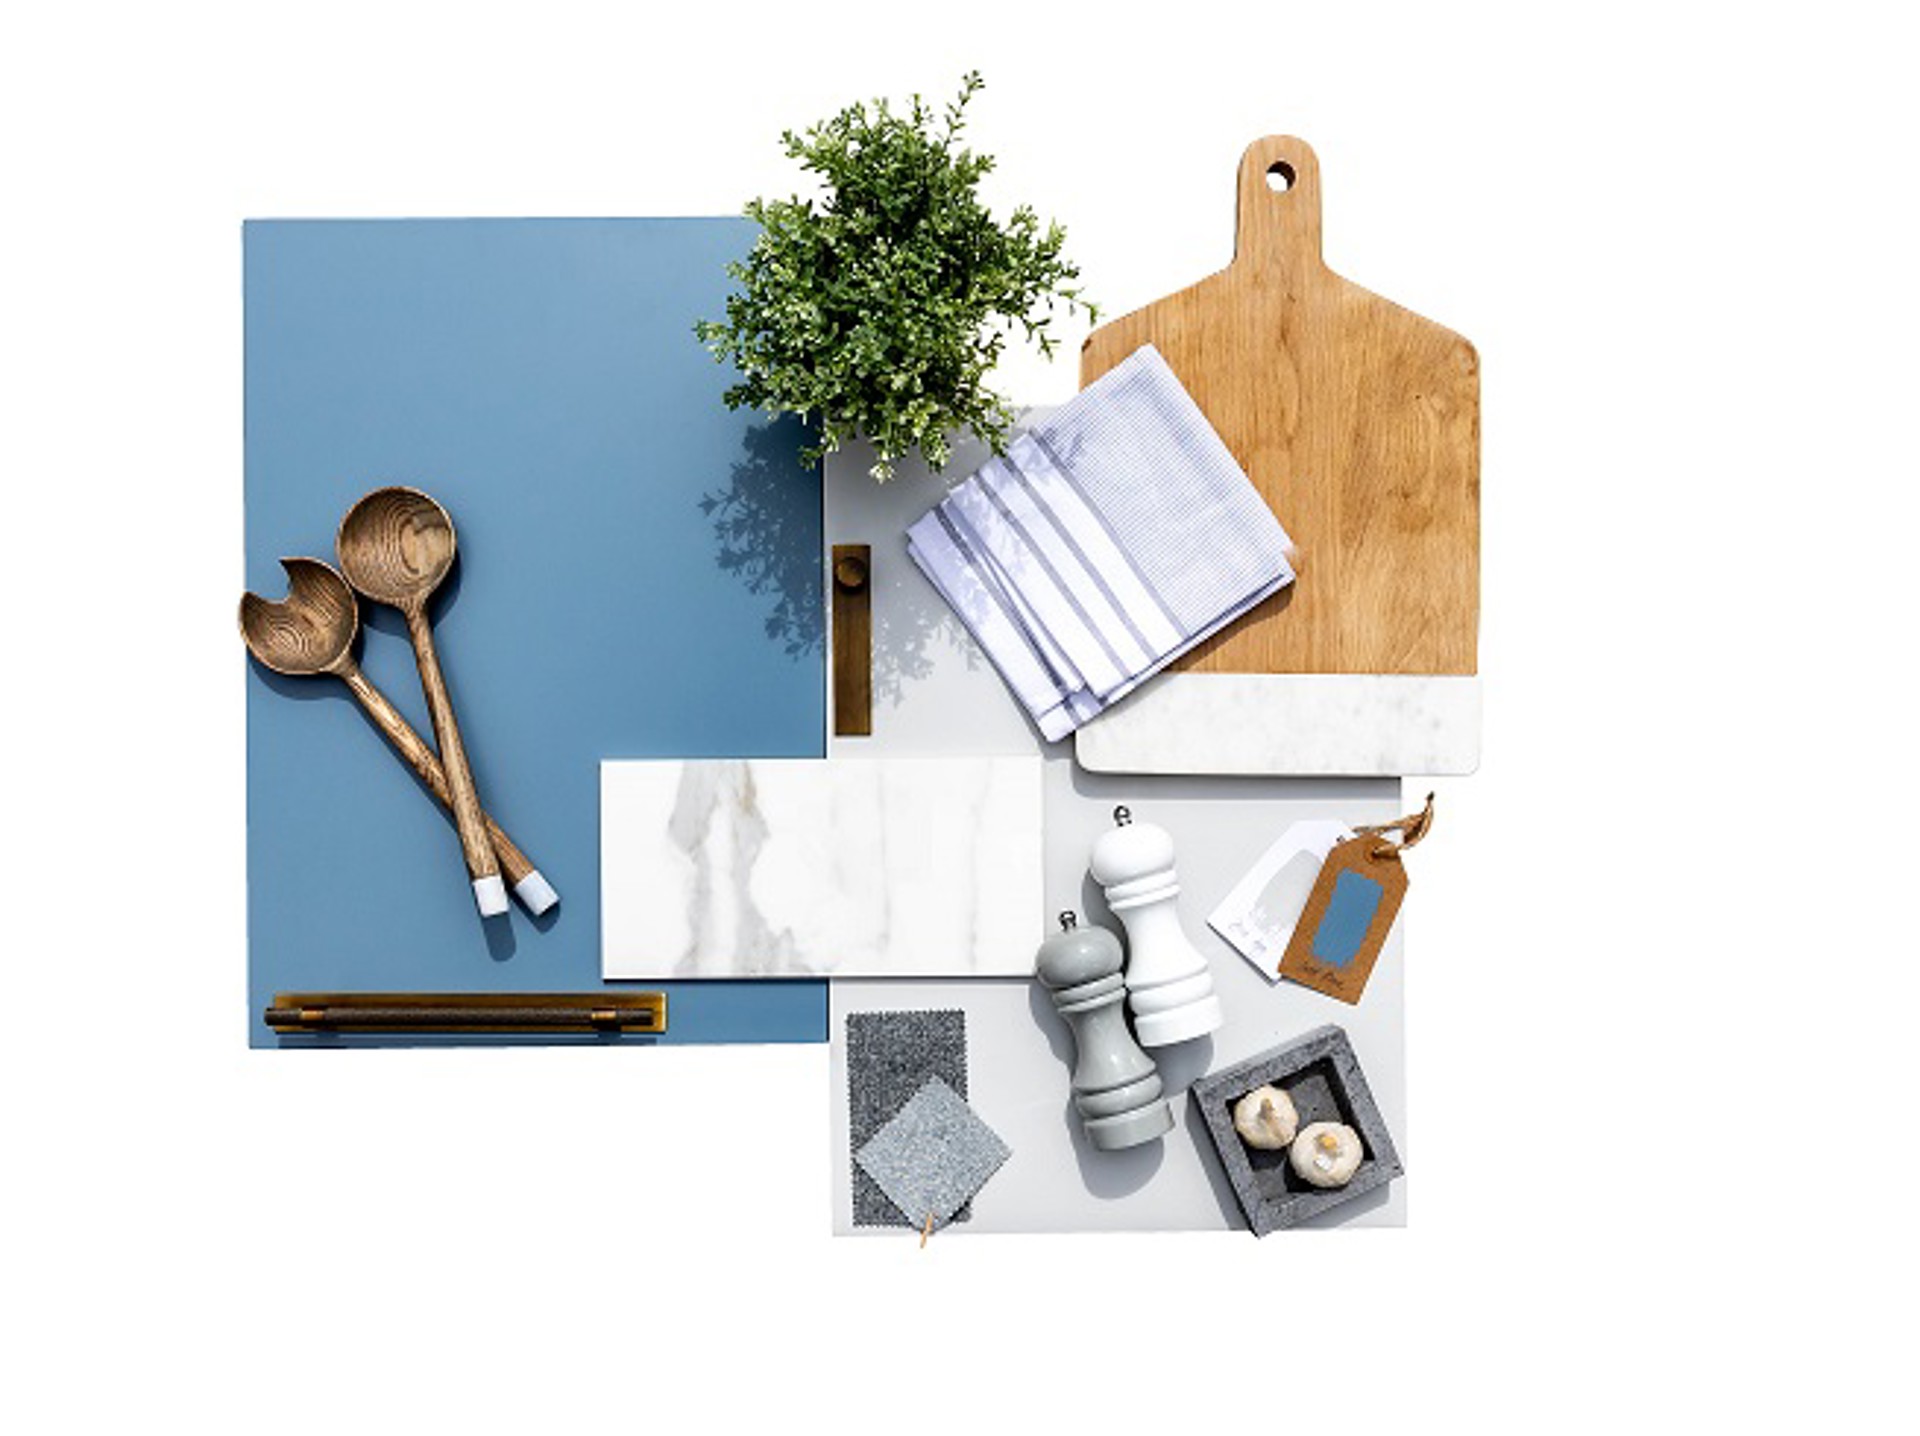 Creating a moodboard for your dream kitchen